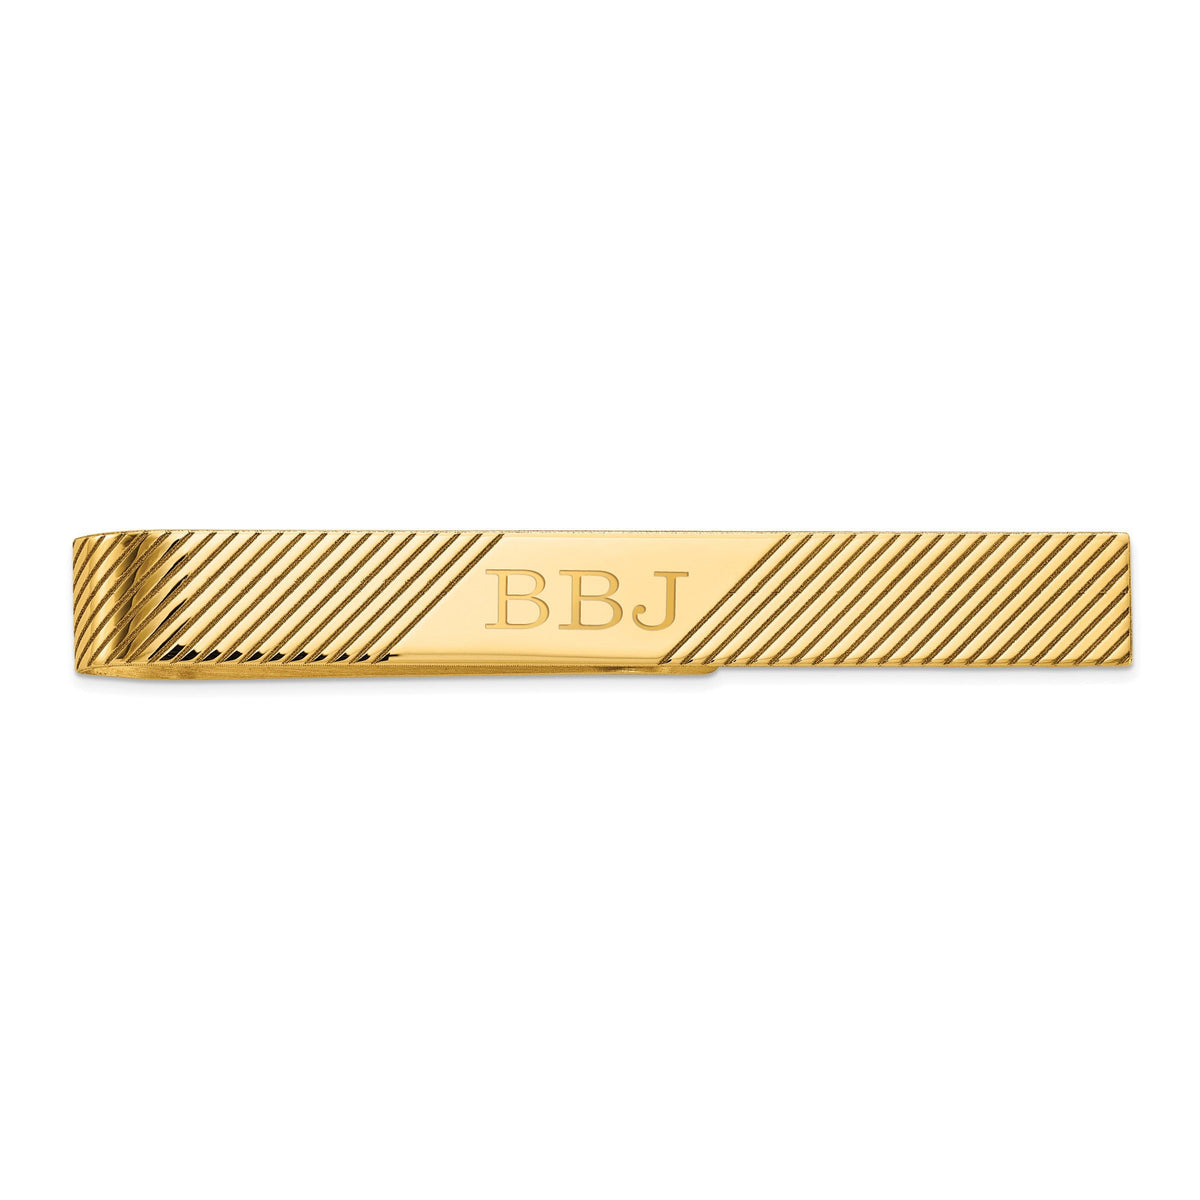 Solid 14k Yellow Gold Tie Bar 2 inches Wide / 2.92 Grams /  Mens Wedding Gift / Engraved Tie Bar / Gold Tie Slide / Gift Box Included / USA